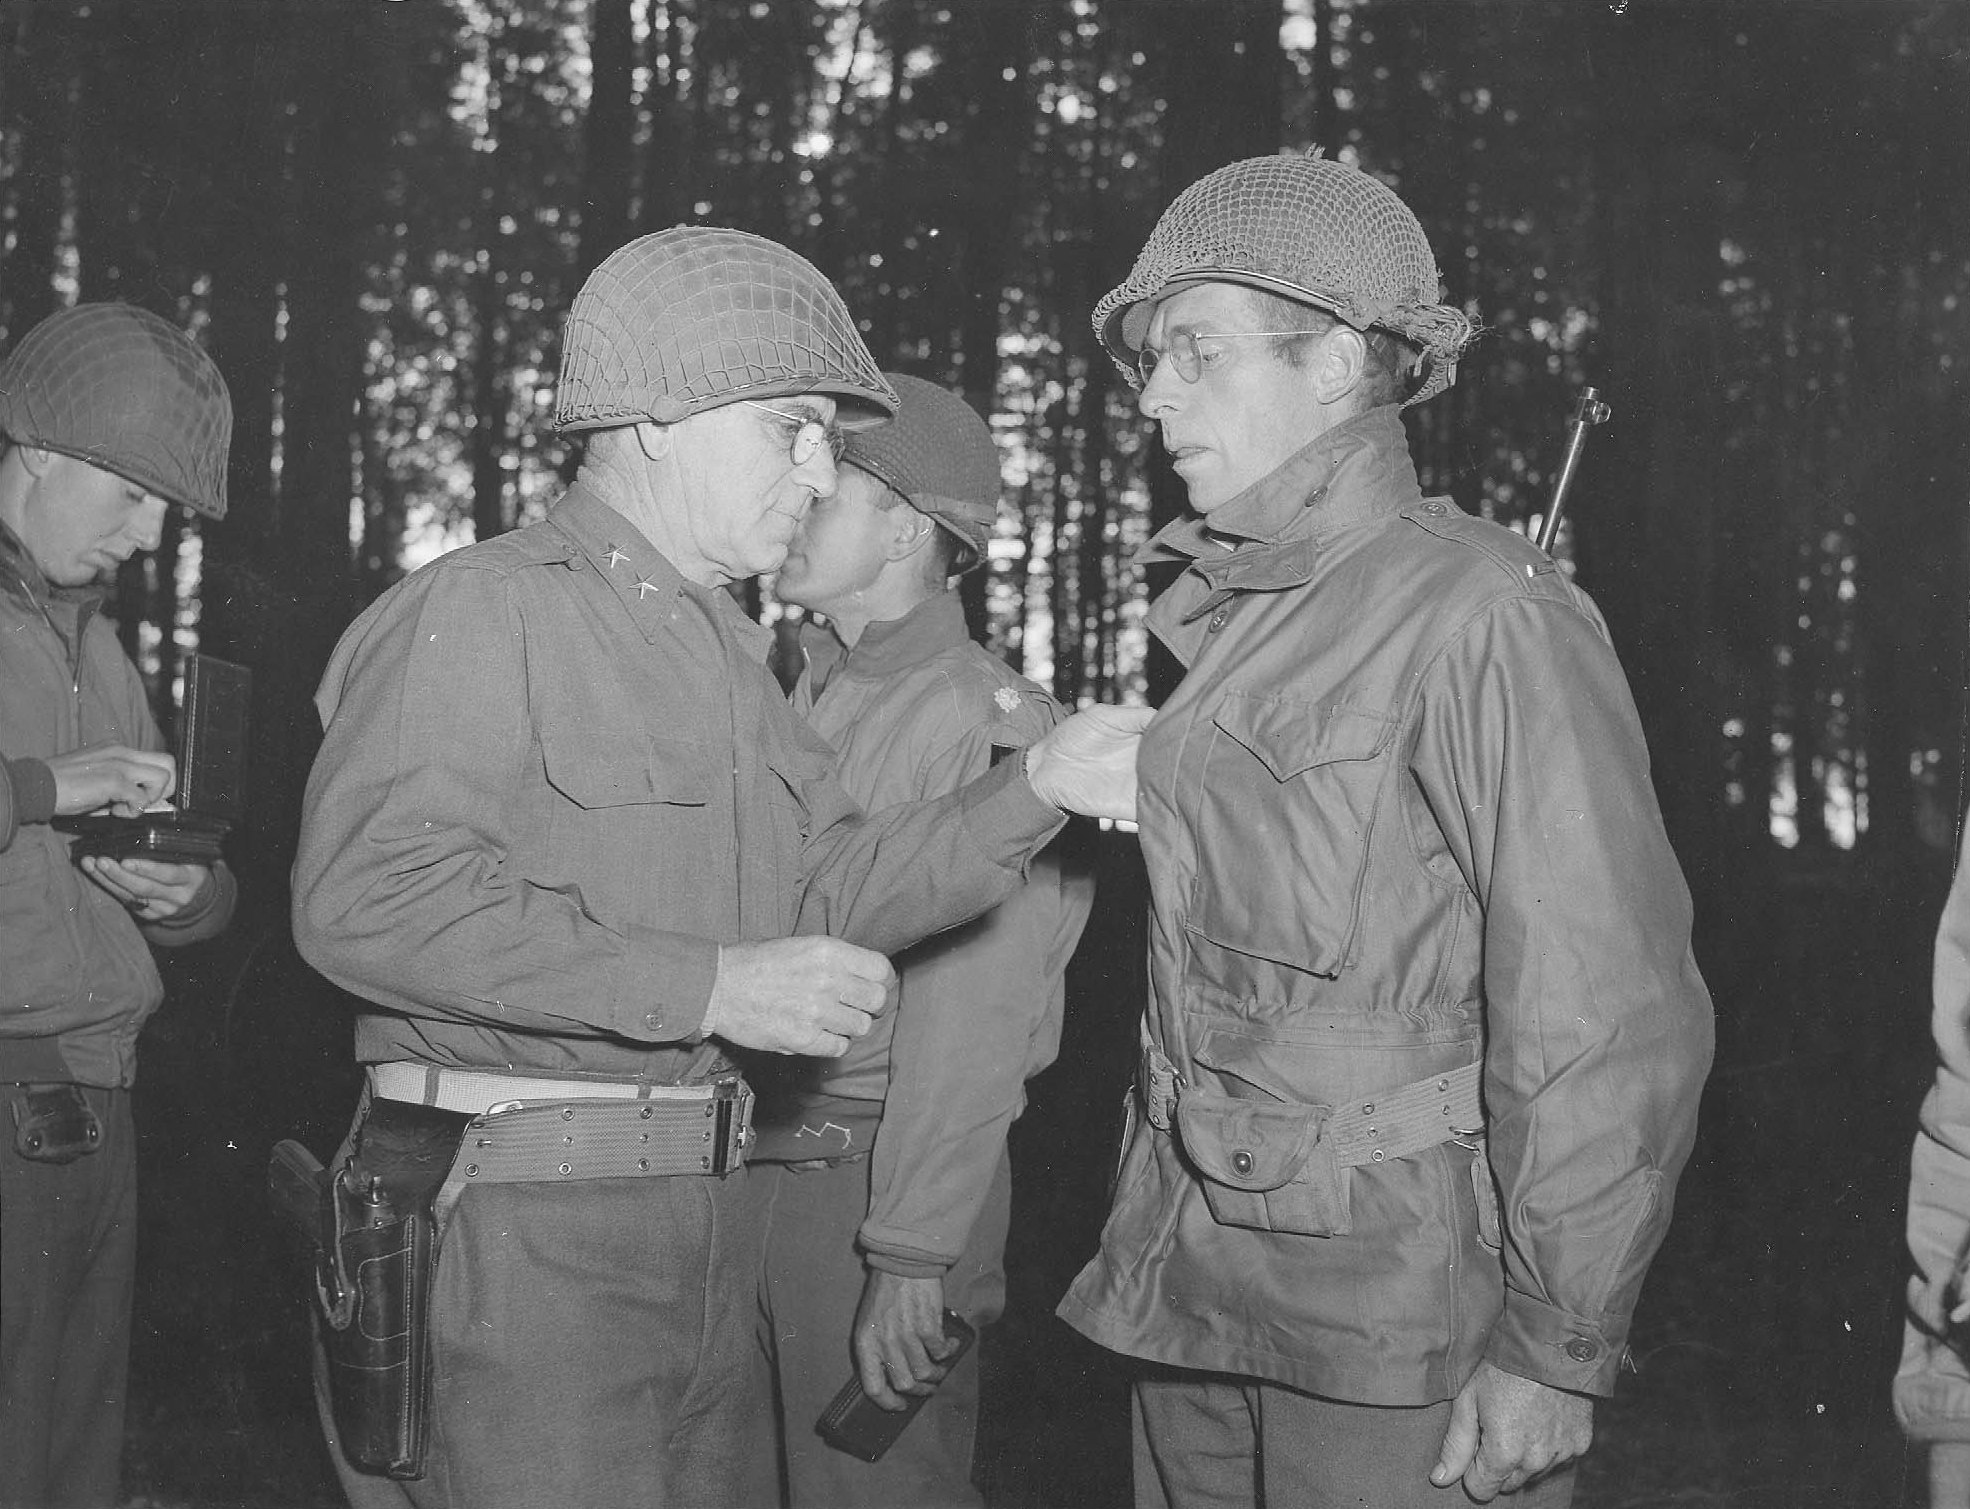 MGen Leonard Gerow presenting the Distinguished Service Cross to 1st Lt William J Kehaly of San Francisco, California on 11 Sep 1944 for Lt Kehaly’s actions on D-Day, 6 Jun 1944.